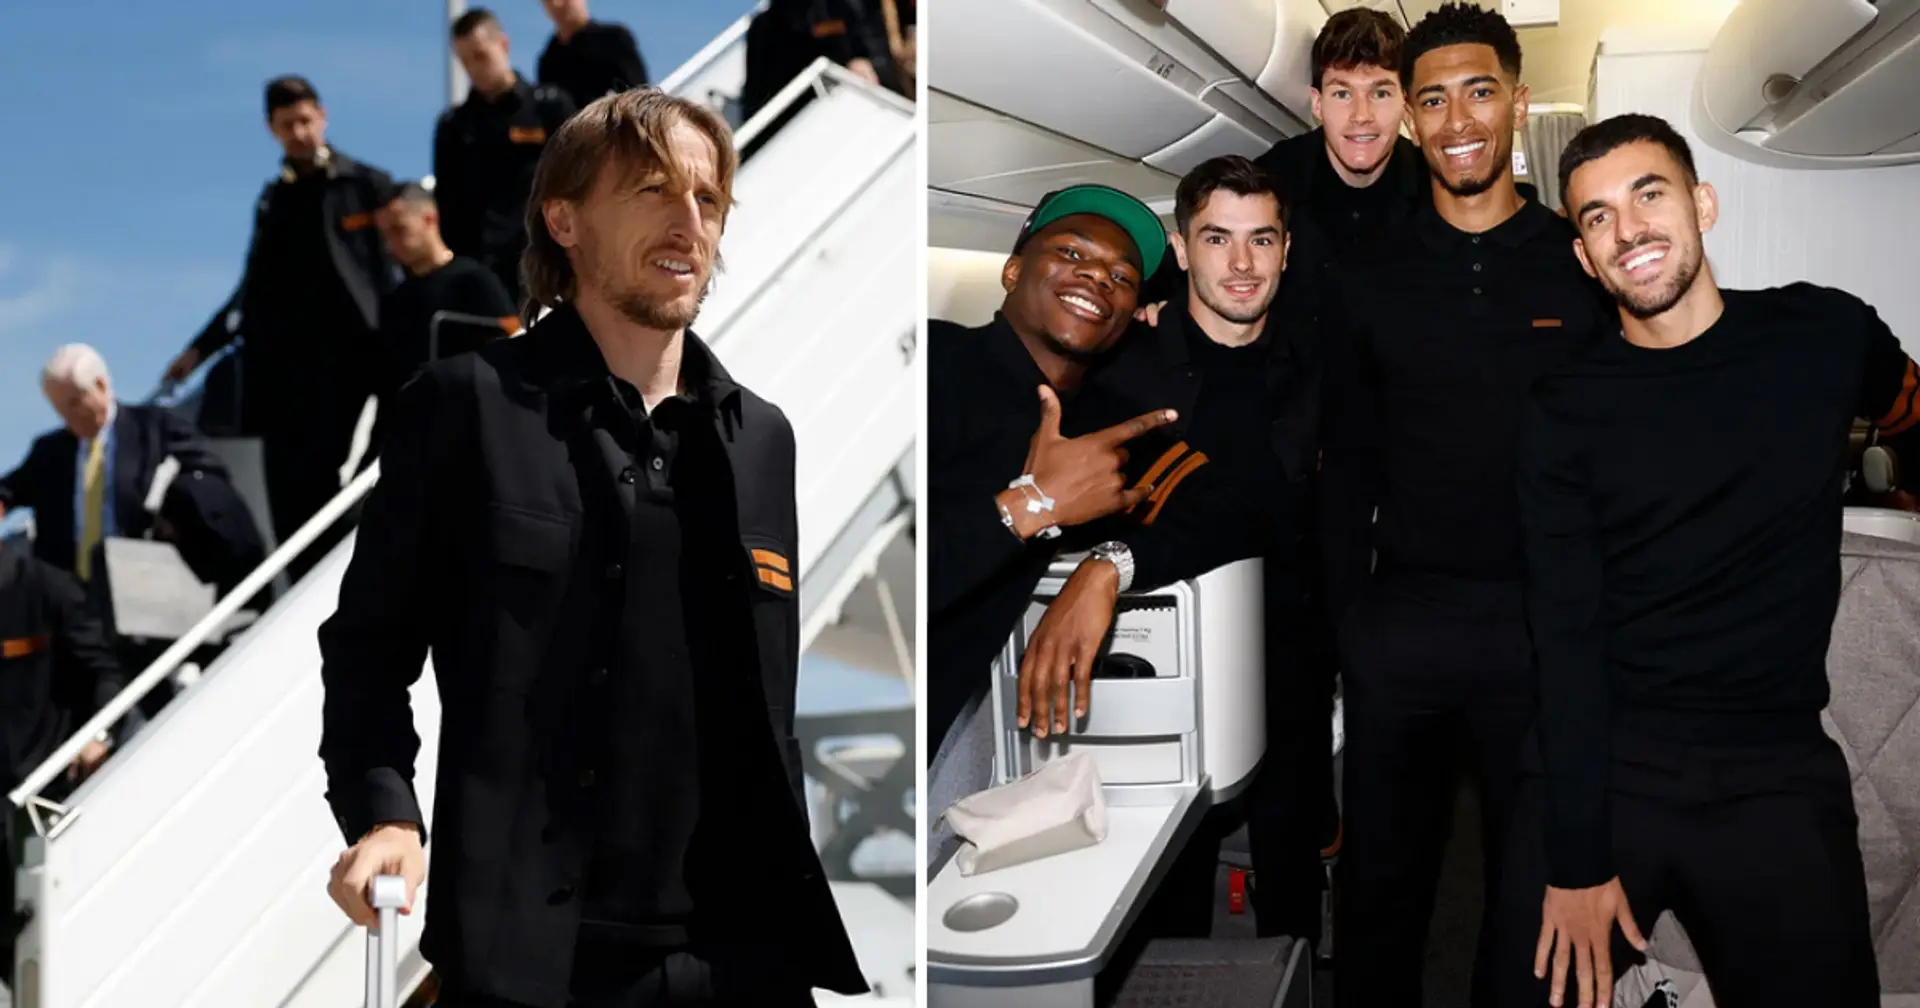 10 best pics as Real Madrid arrive in Munich for Champions League semi-final